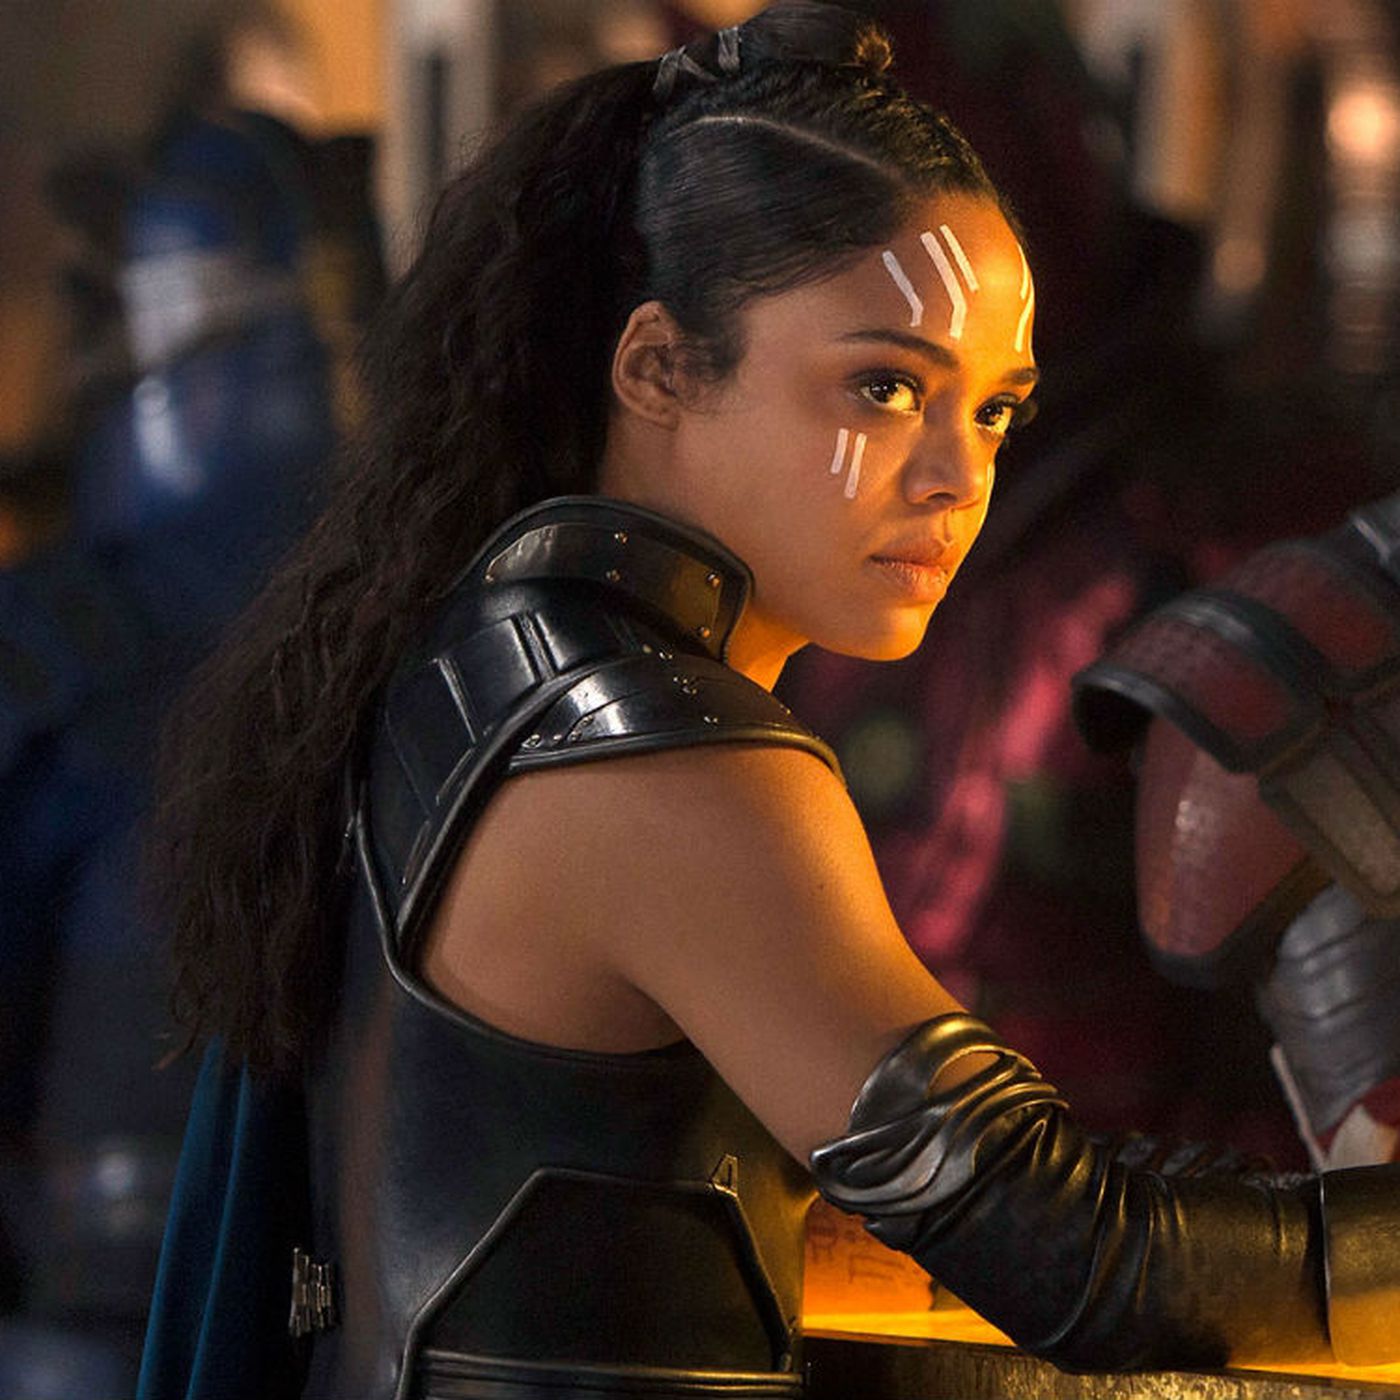 Valkyrie is Thor: Ragnarok's breakout star and marks a major moment for Marvel